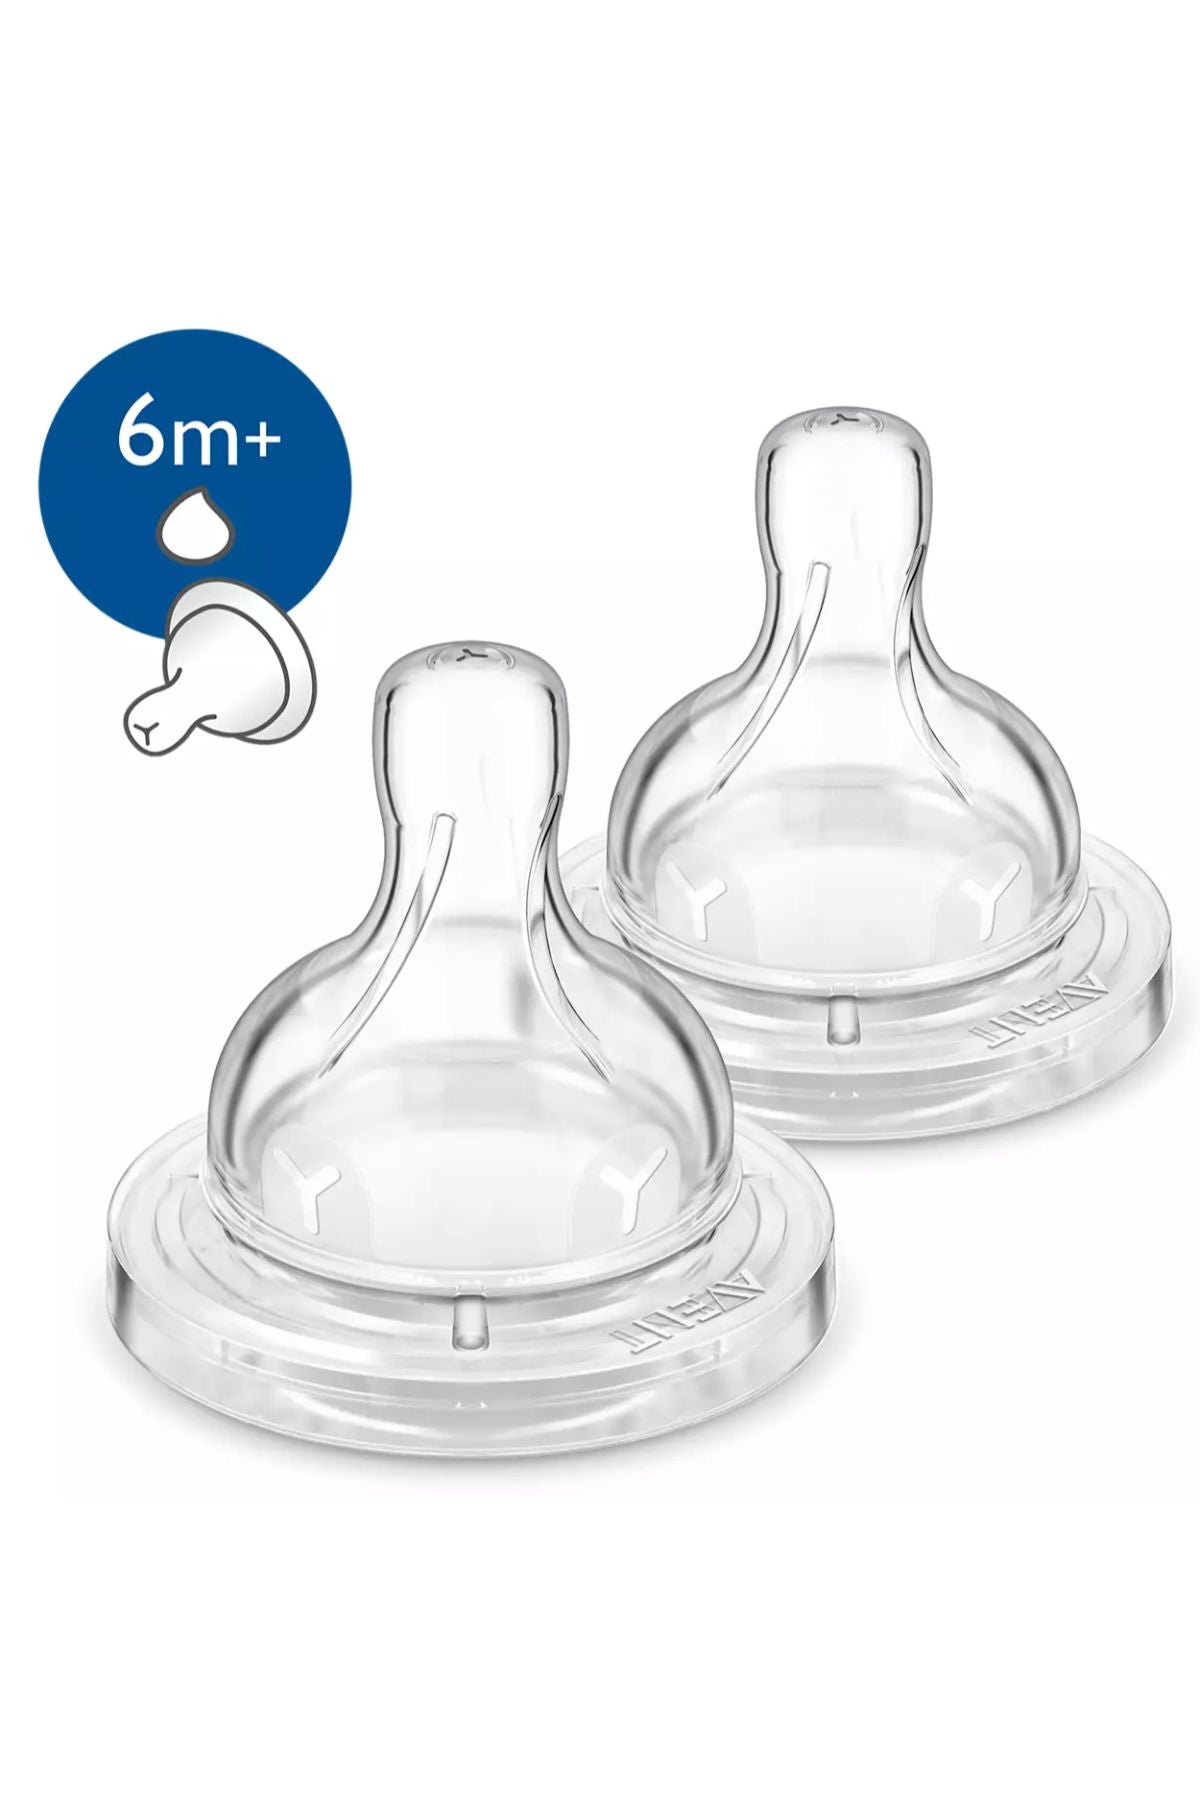 philips avent - silicone teat 6m+ thick feed pk2 - philips avent - silicone teat 6m+ thick feed pk2 - Cotton Candy™ Pakistan